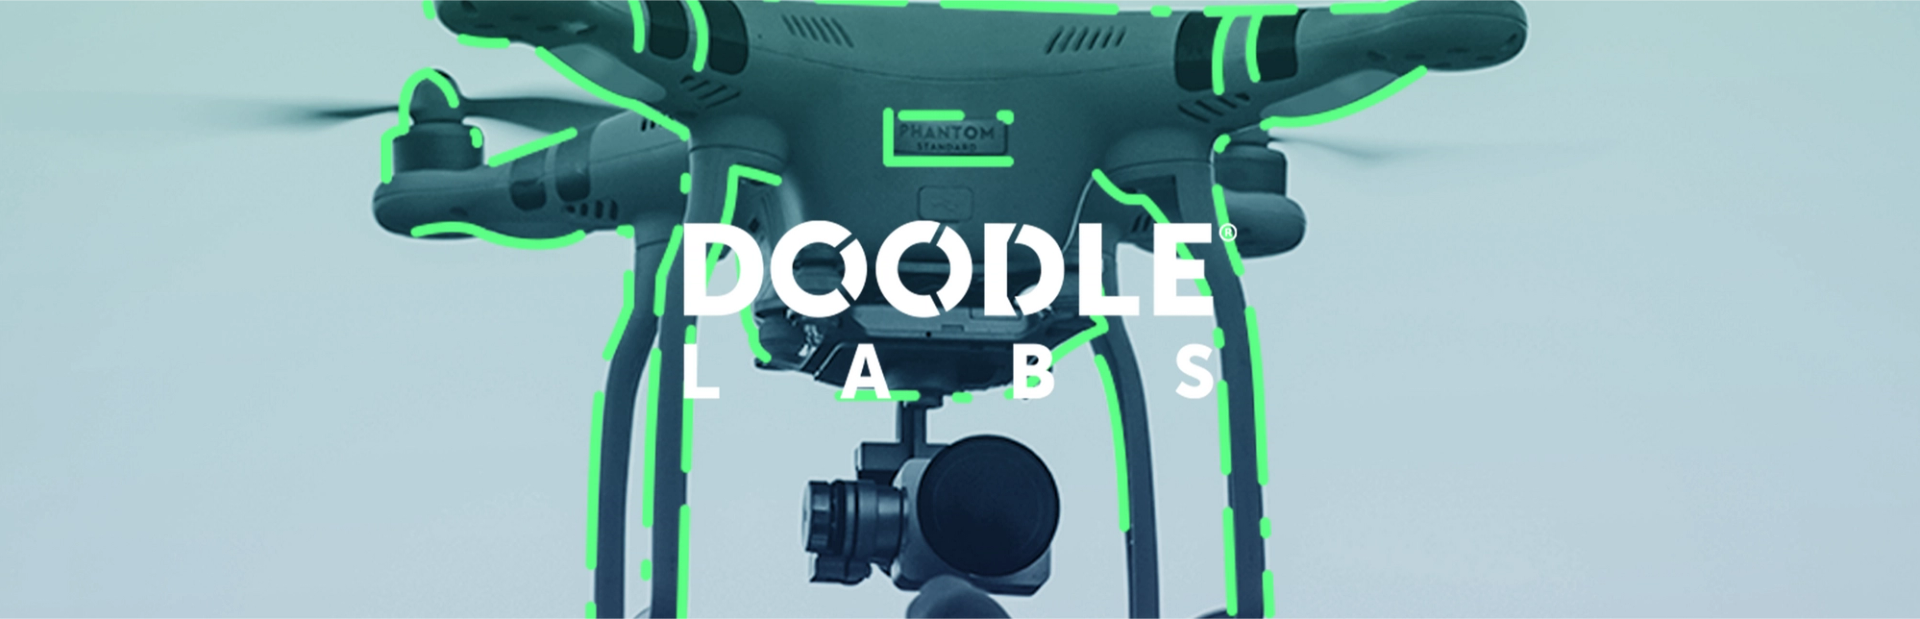 How Doodle Labs Rose as a Challenger Brand